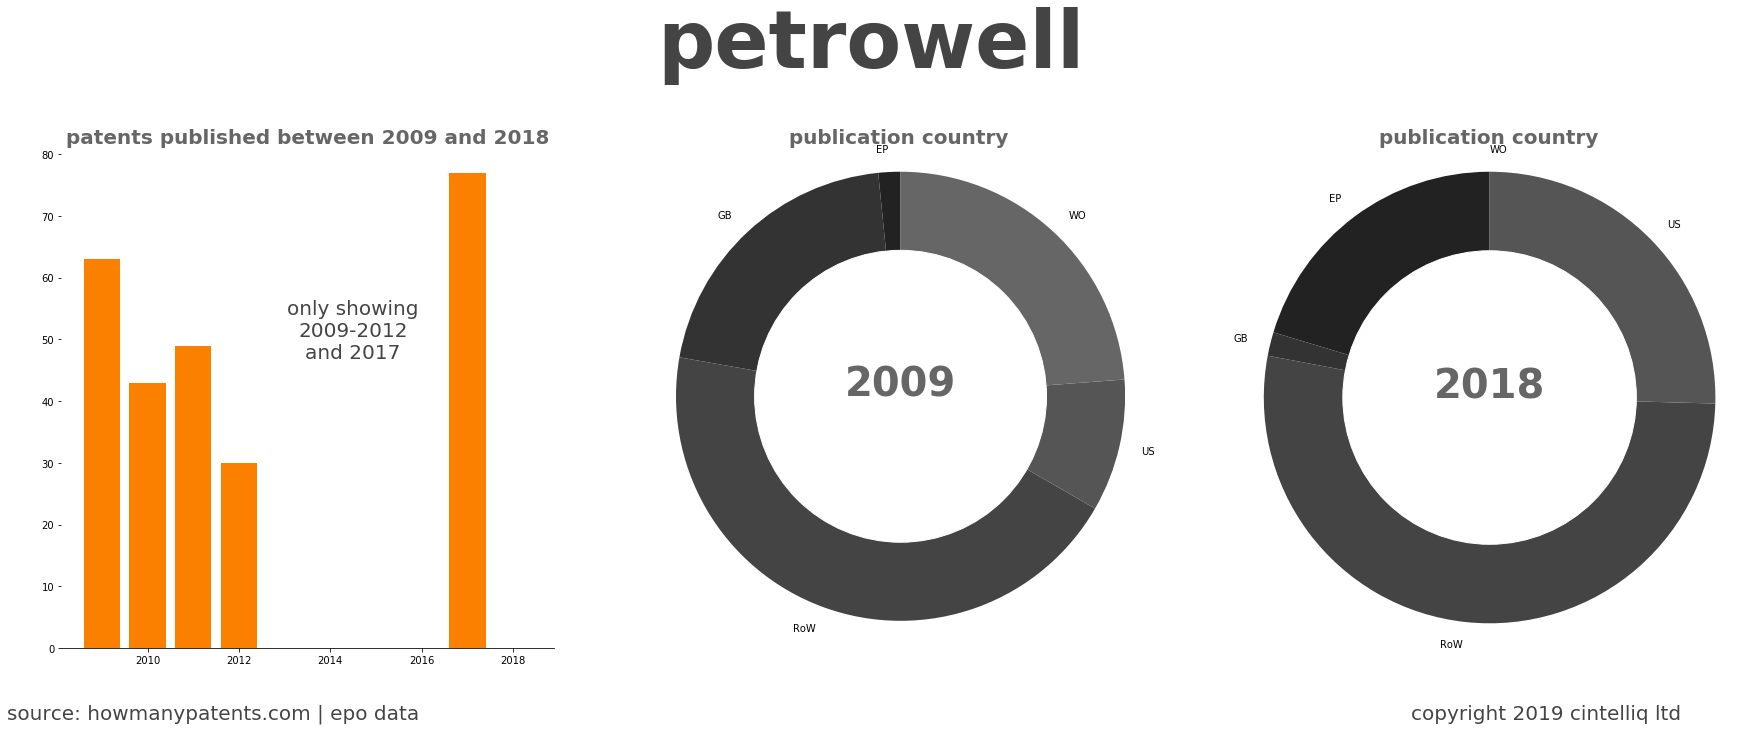 summary of patents for Petrowell